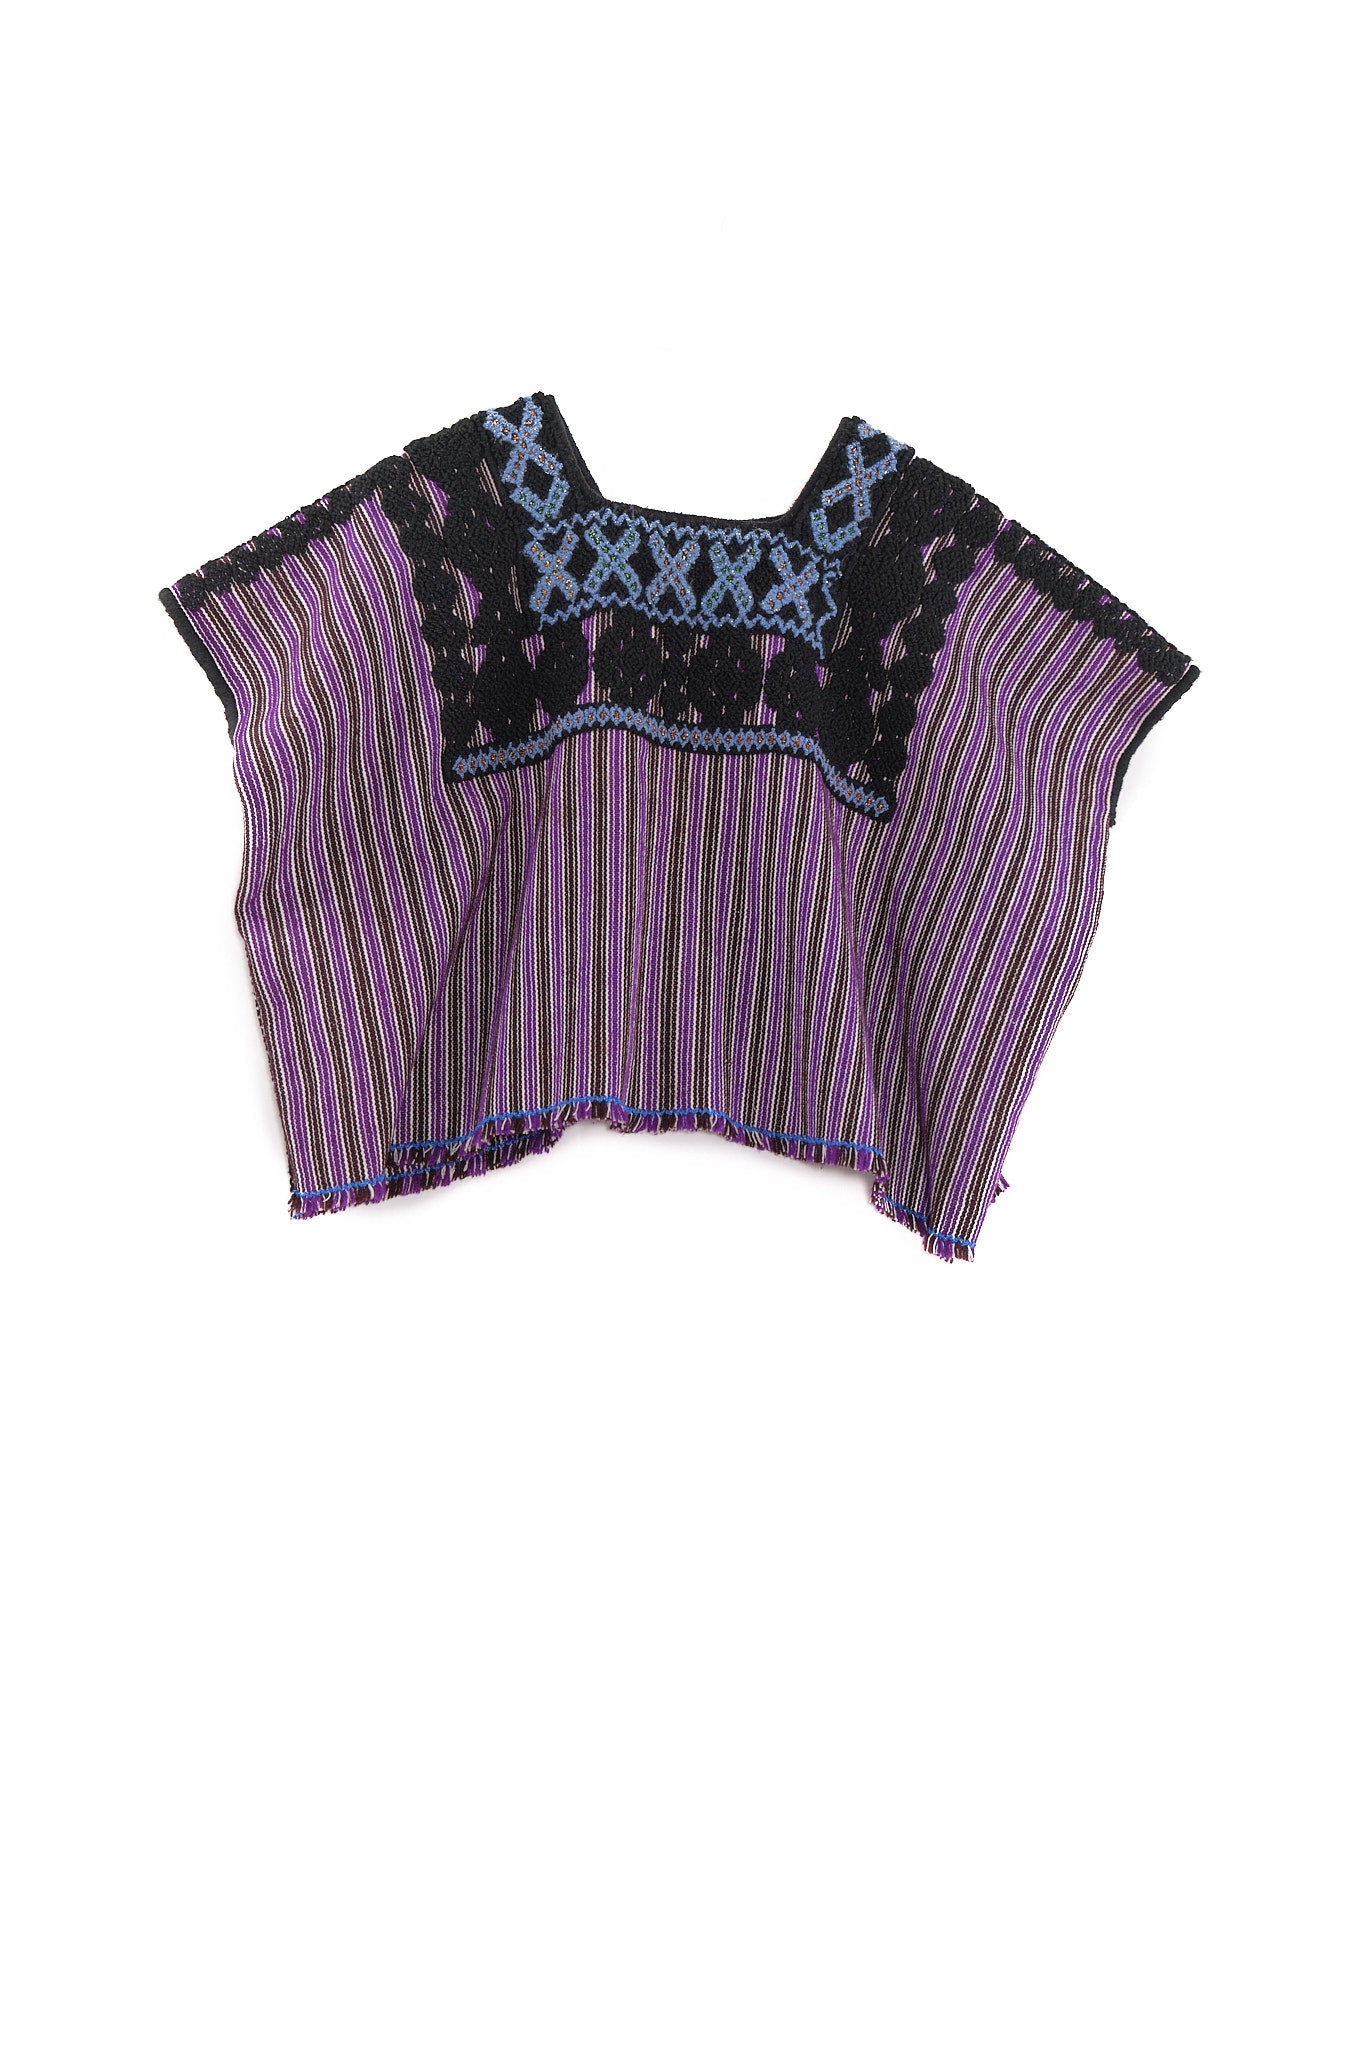 Chenalho Blouse striped with black brocade embossed garment